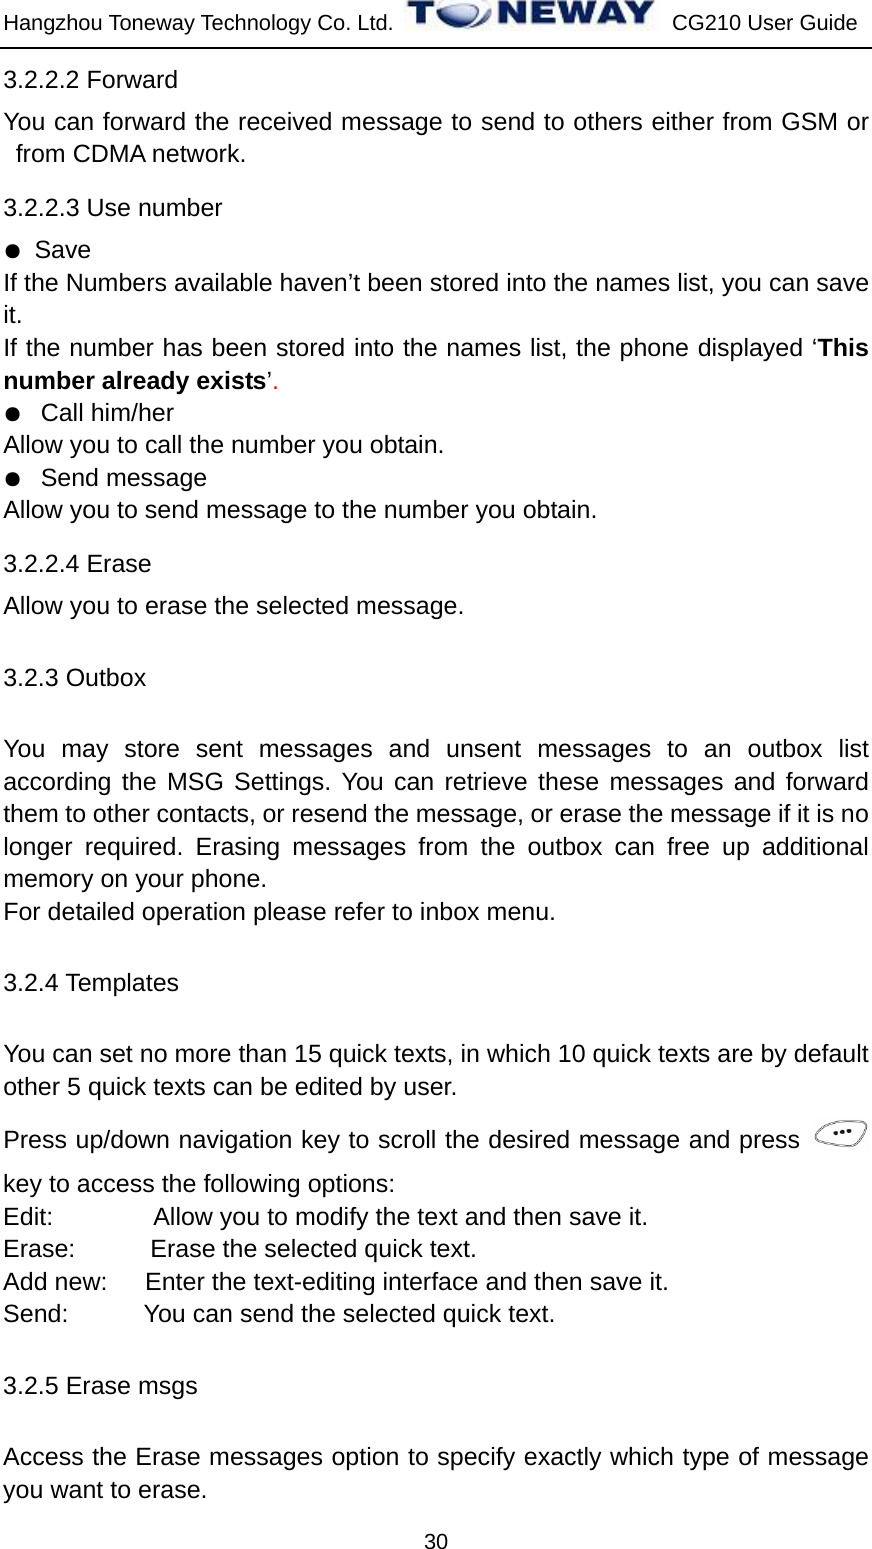 Hangzhou Toneway Technology Co. Ltd.    CG210 User Guide 30 3.2.2.2 Forward You can forward the received message to send to others either from GSM or from CDMA network.   3.2.2.3 Use number ● Save If the Numbers available haven’t been stored into the names list, you can save it. If the number has been stored into the names list, the phone displayed ‘This number already exists’. ●  Call him/her Allow you to call the number you obtain. ●  Send message Allow you to send message to the number you obtain. 3.2.2.4 Erase Allow you to erase the selected message. 3.2.3 Outbox You may store sent messages and unsent messages to an outbox list according the MSG Settings. You can retrieve these messages and forward them to other contacts, or resend the message, or erase the message if it is no longer required. Erasing messages from the outbox can free up additional memory on your phone.   For detailed operation please refer to inbox menu. 3.2.4 Templates You can set no more than 15 quick texts, in which 10 quick texts are by default other 5 quick texts can be edited by user.   Press up/down navigation key to scroll the desired message and press   key to access the following options: Edit:                Allow you to modify the text and then save it. Erase:      Erase the selected quick text. Add new:      Enter the text-editing interface and then save it. Send:            You can send the selected quick text. 3.2.5 Erase msgs Access the Erase messages option to specify exactly which type of message you want to erase. 